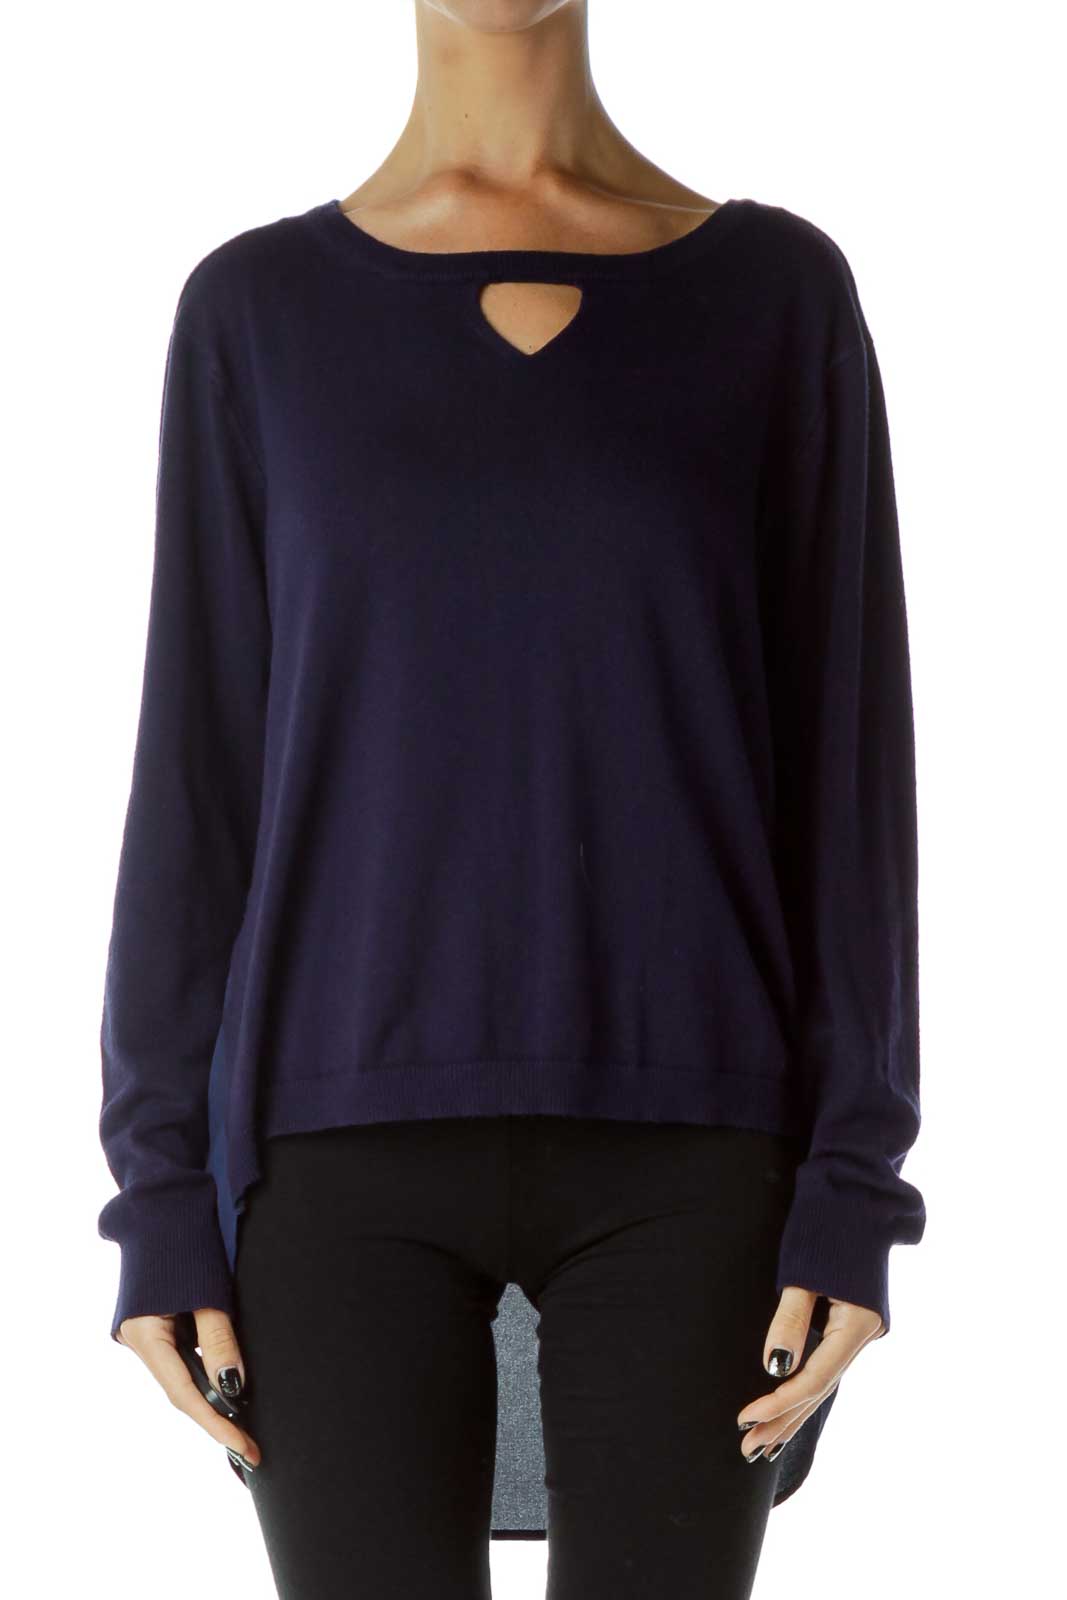 Navy Sheer Back Knit Sweater Front